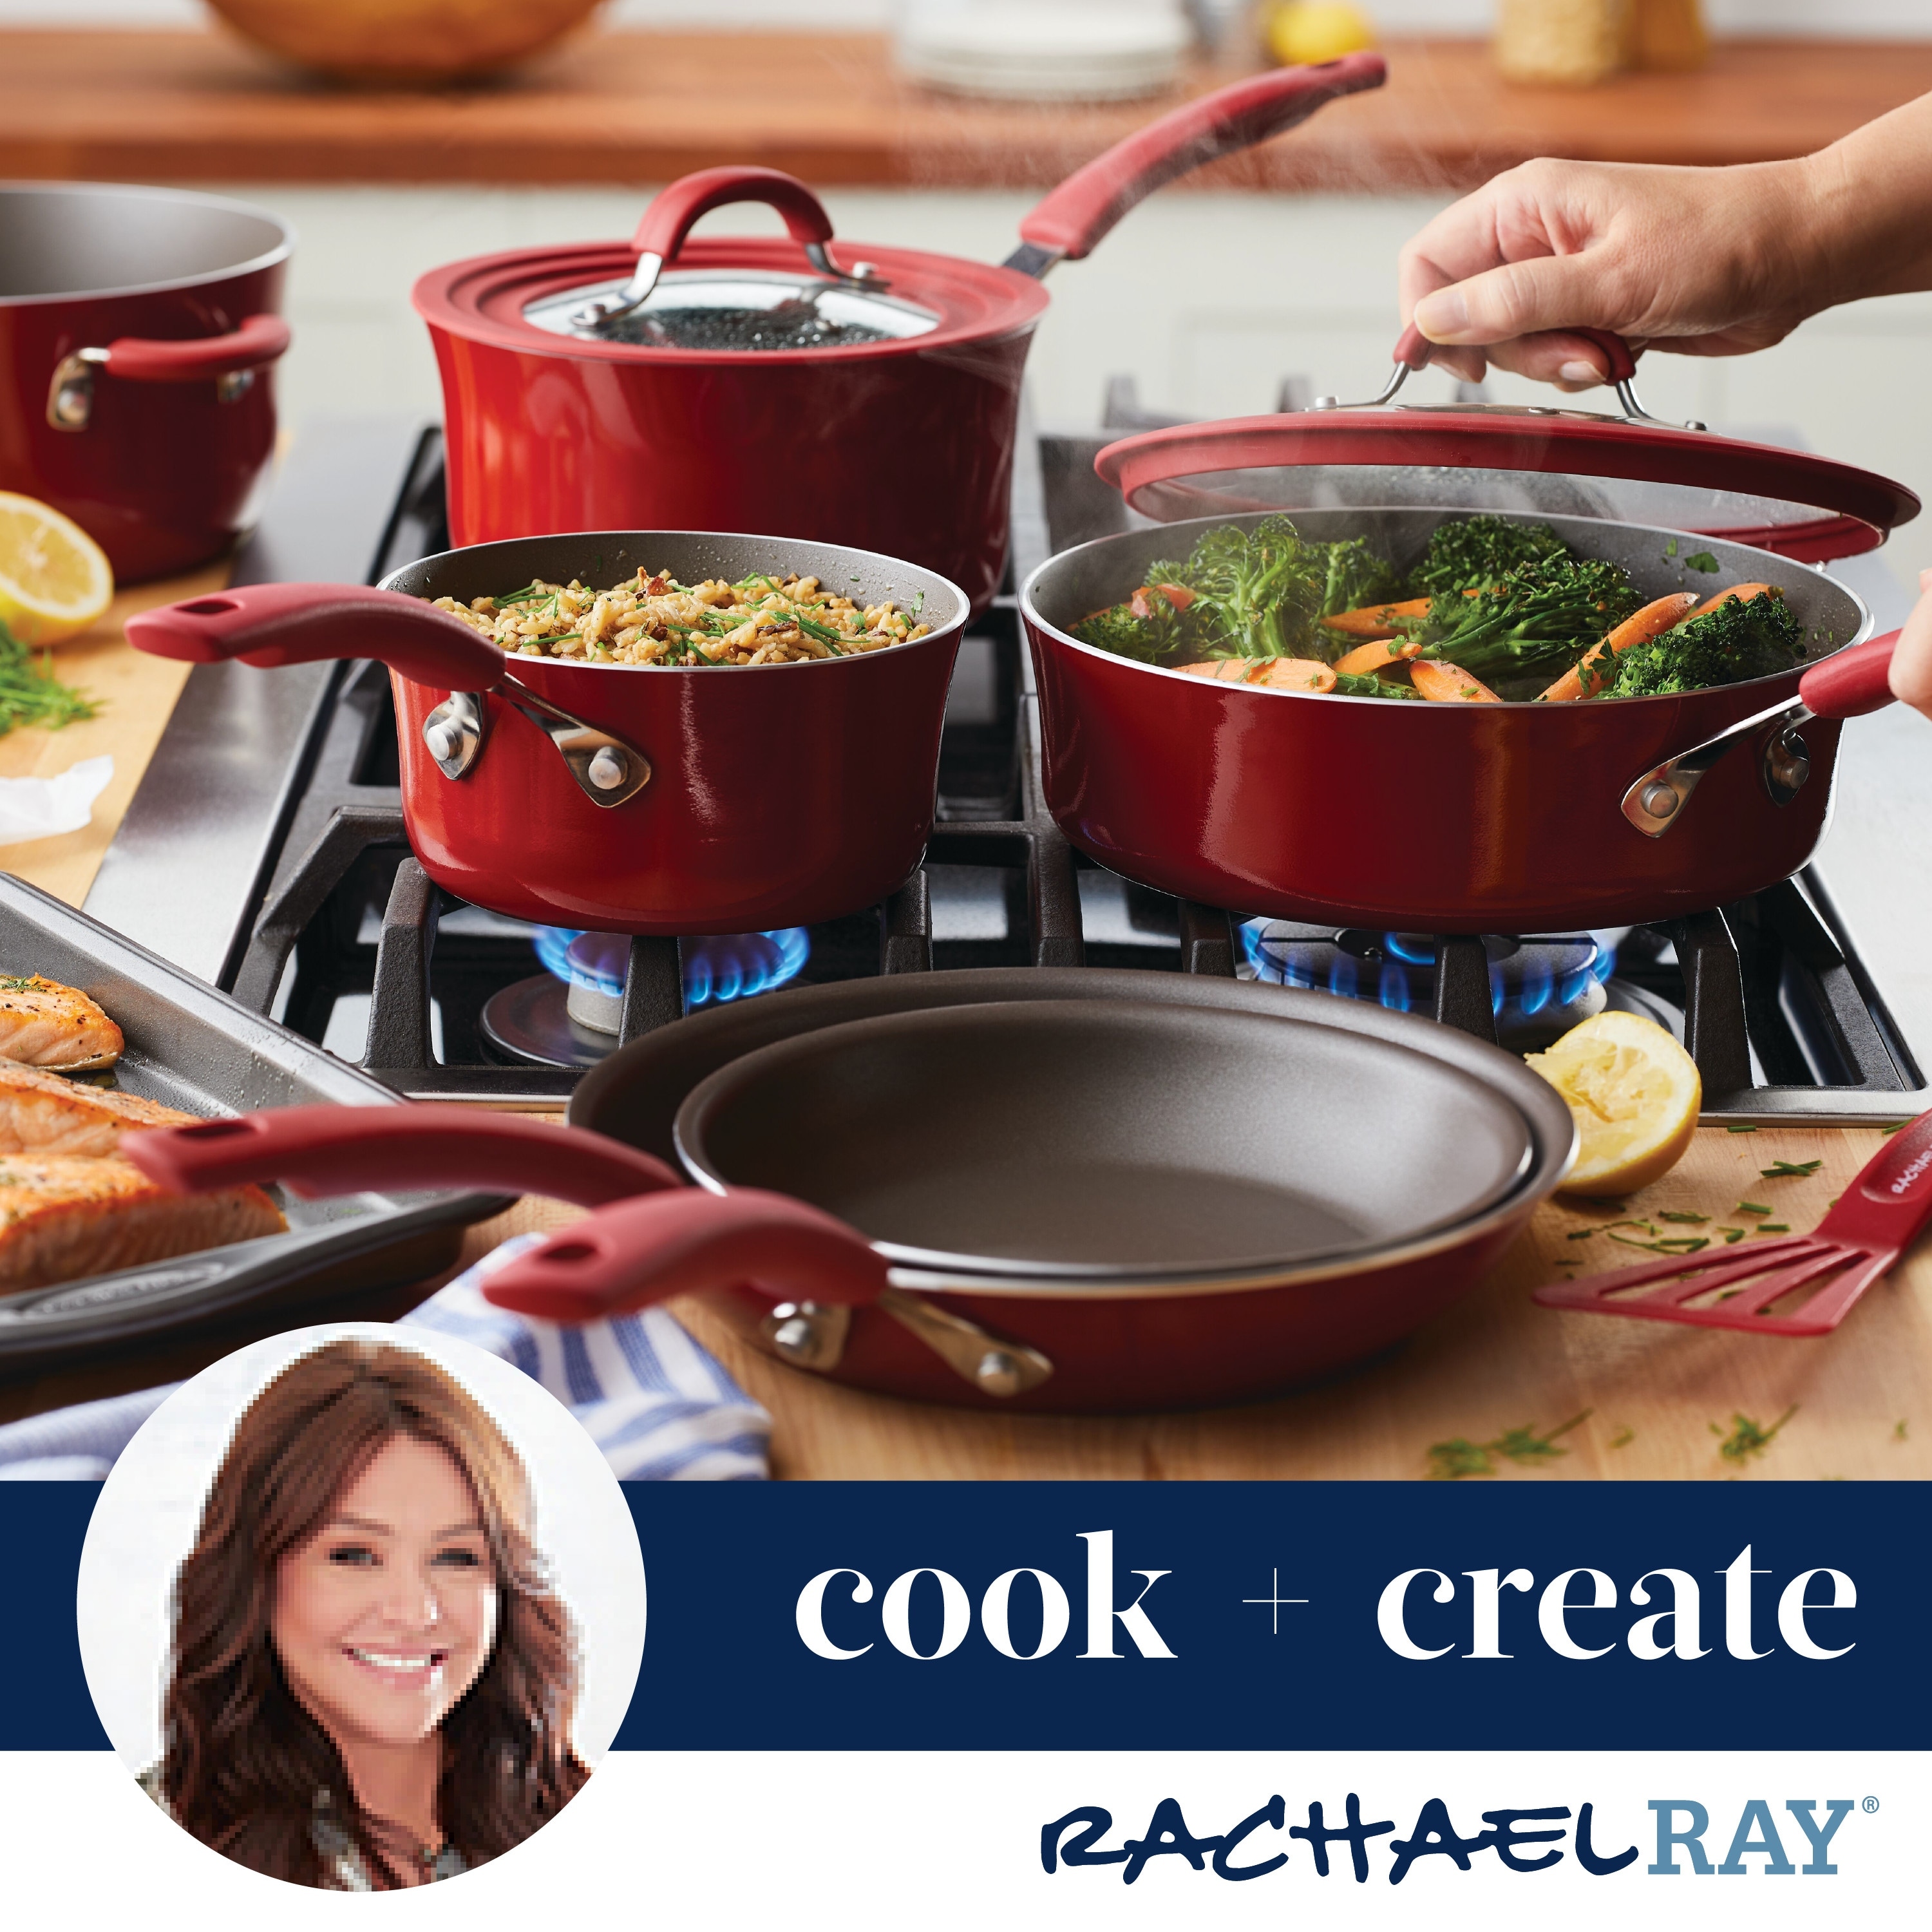 https://ak1.ostkcdn.com/images/products/is/images/direct/4b3a40bcdfd24c33d547c8ab4a0109cad7eb9725/Rachael-Ray-Cook-%2B-Create-Aluminum-Nonstick-Cookware-Pots-and-Pans-Set%2C-10-Piece%2C-Agave-Blue.jpg